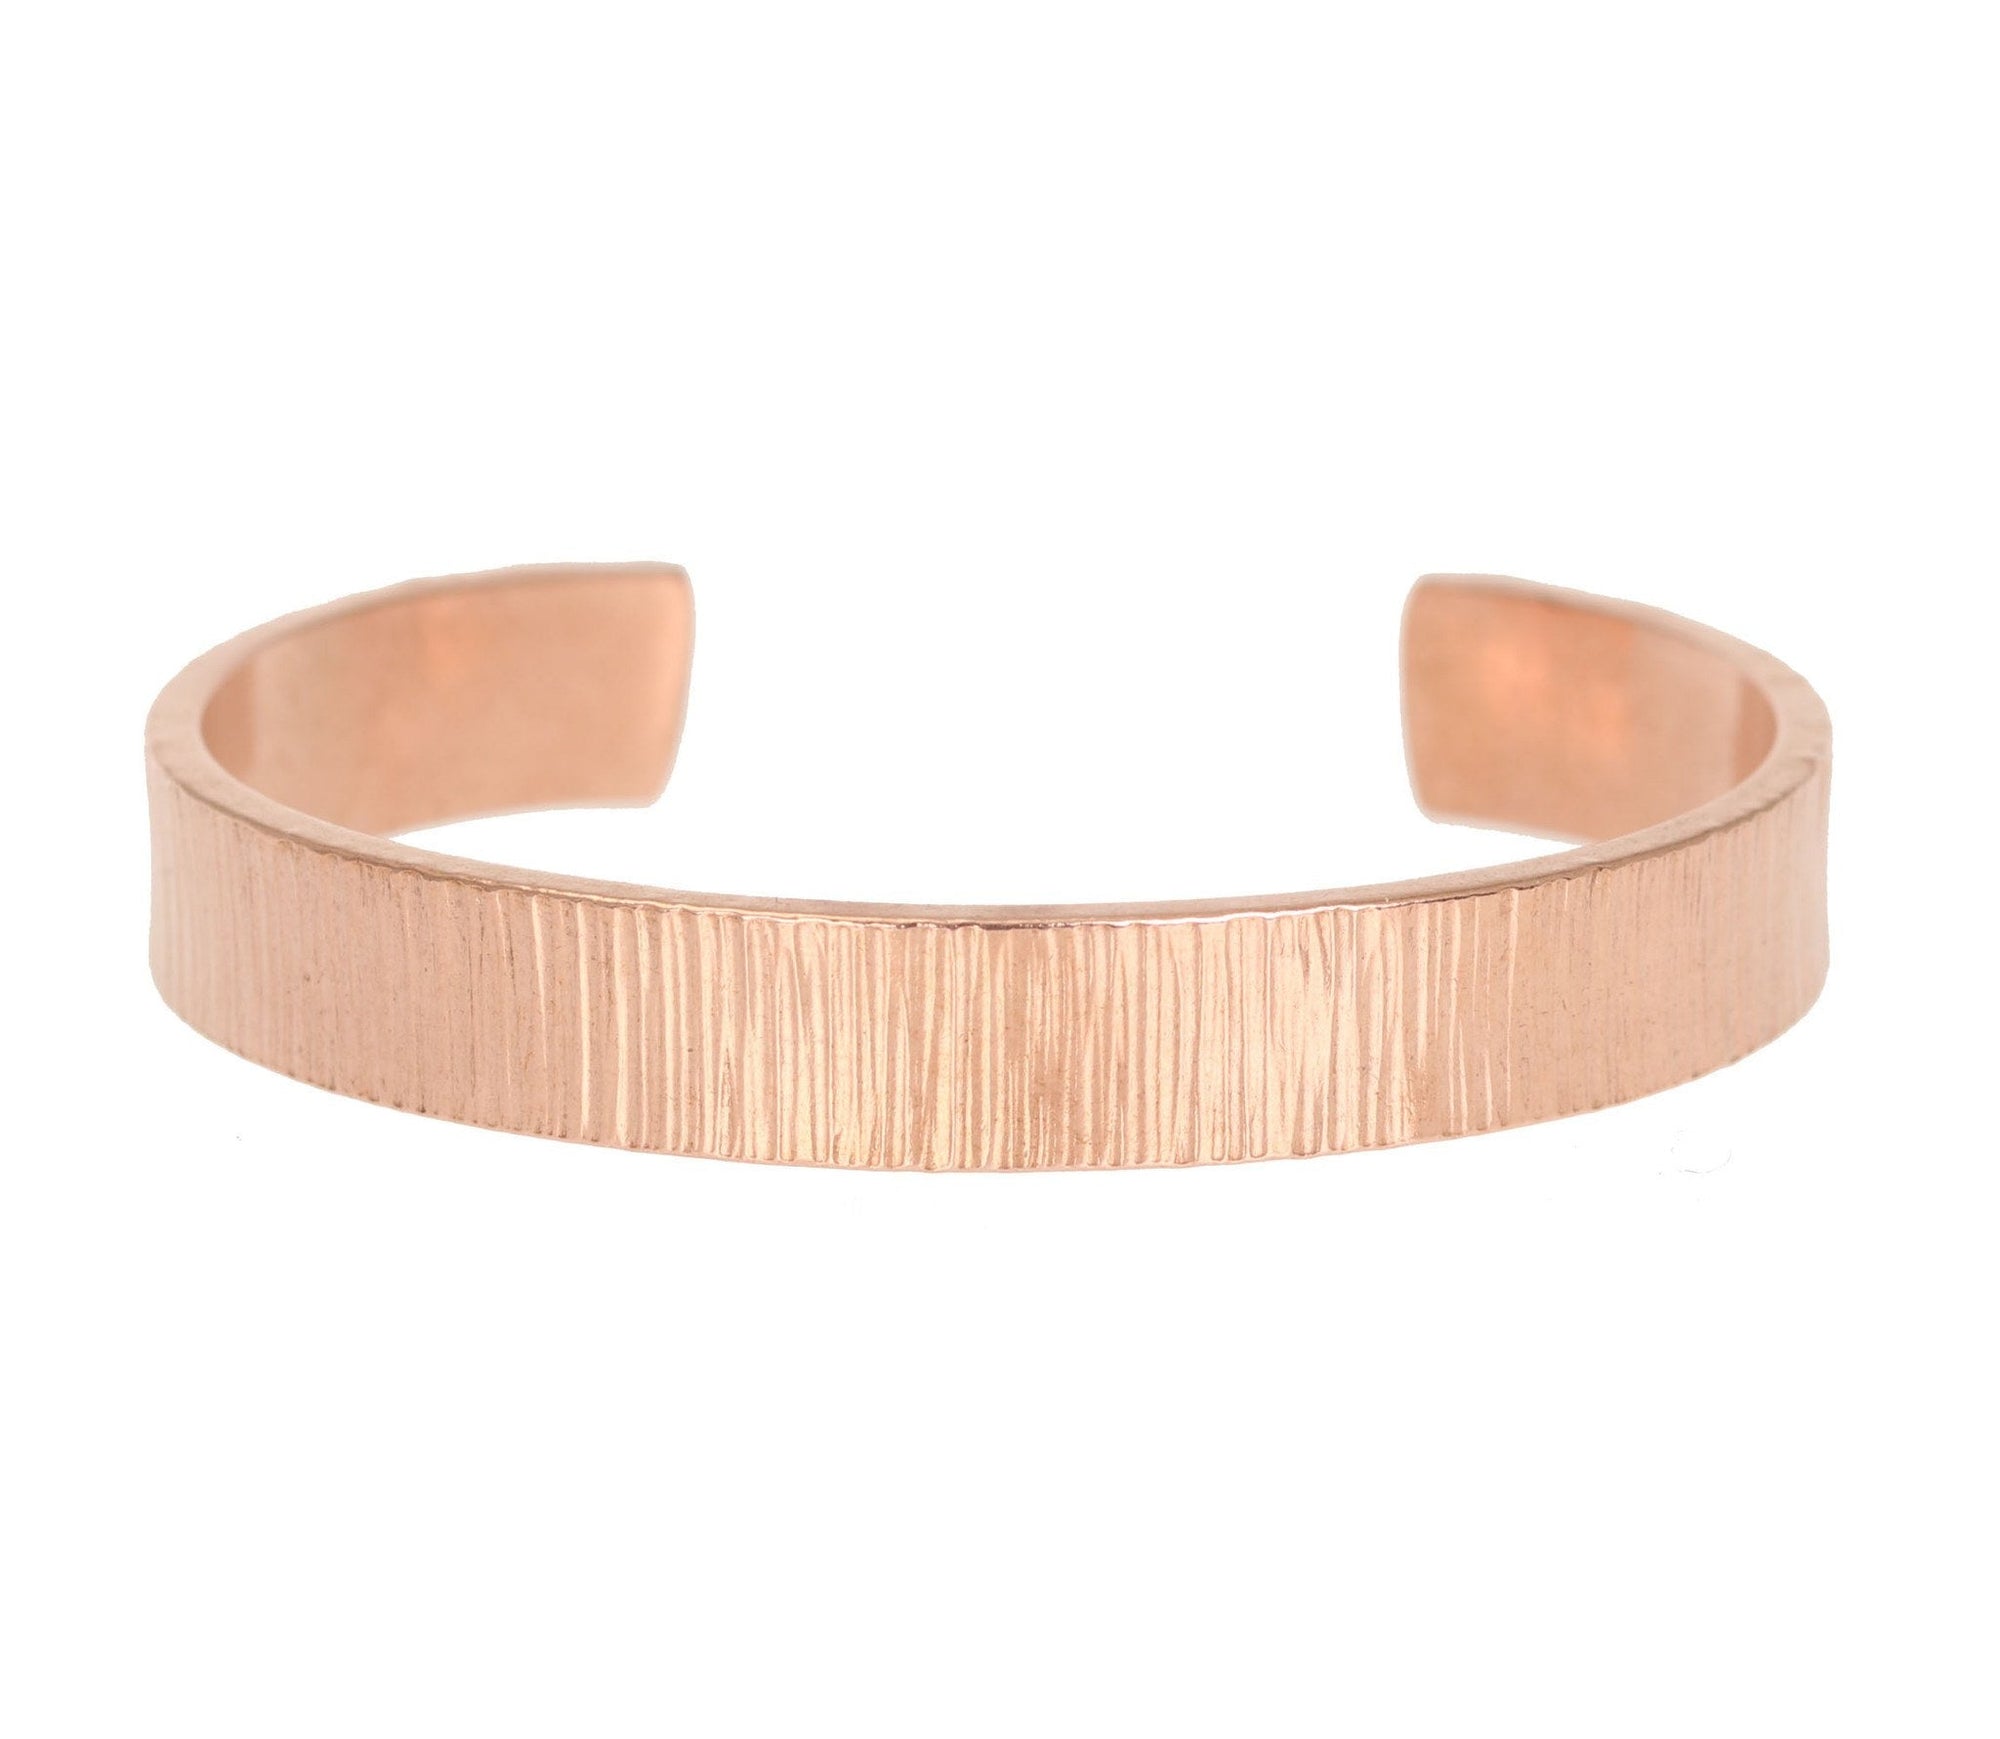 Detail View of 10mm Wide Men's Chased Copper Cuff Bracelet